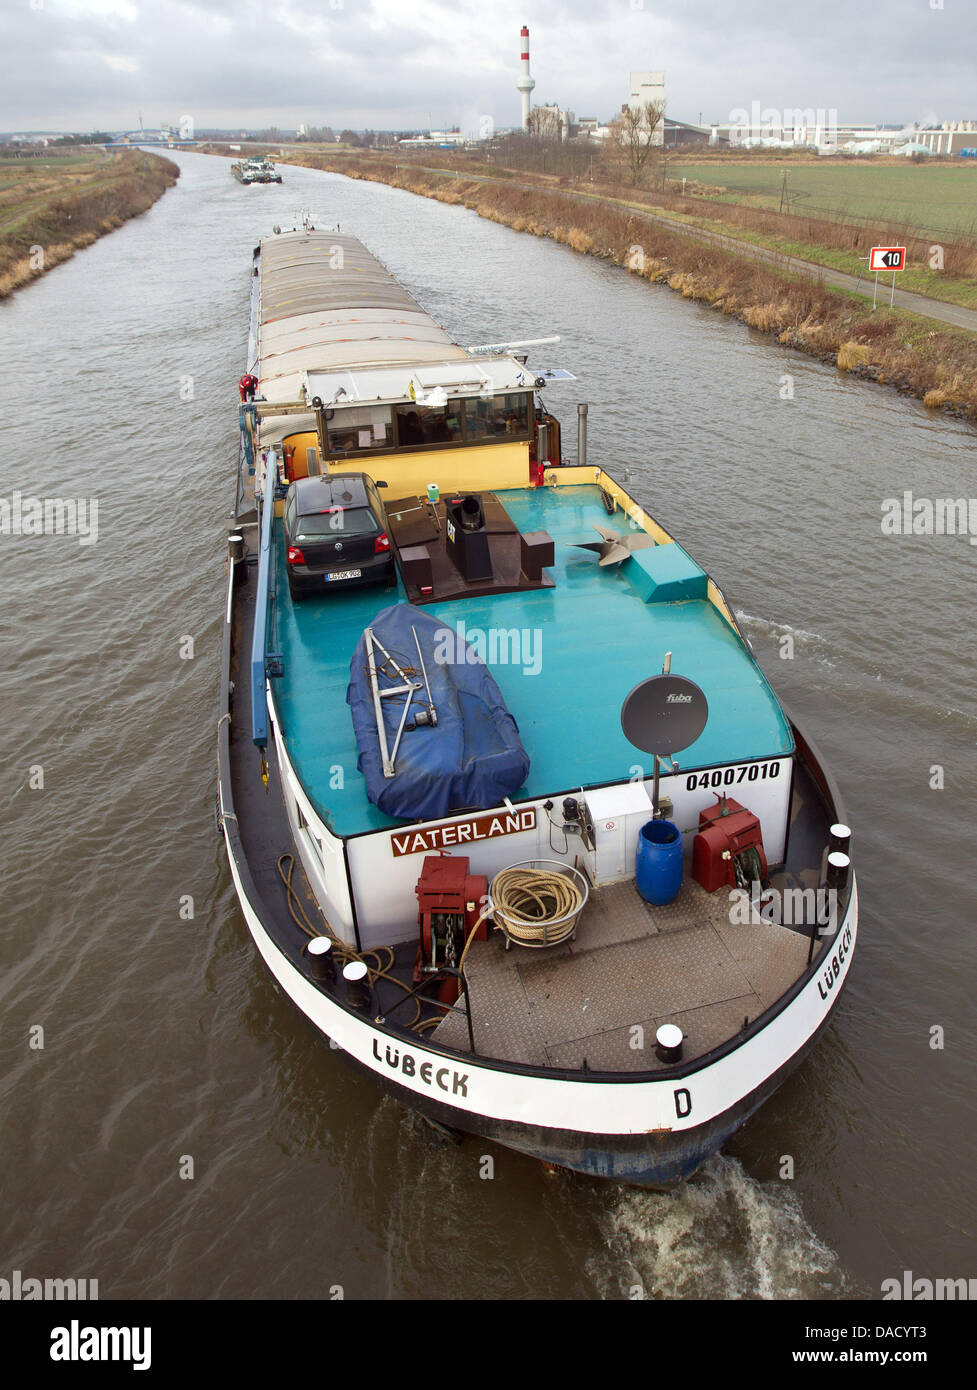 Inland navigation vessels transport goods on the Mittelland Canal (also known as Midland Canal) near Haldensleben, Germany, 21 December 2011. At 325 kilometres in length, the Mittelland Canal is the longest artificial waterway in Germany. It forms an important link in the waterway network of that country, providing the principal east-west inland waterway connection. Photo: Jens Wol Stock Photo